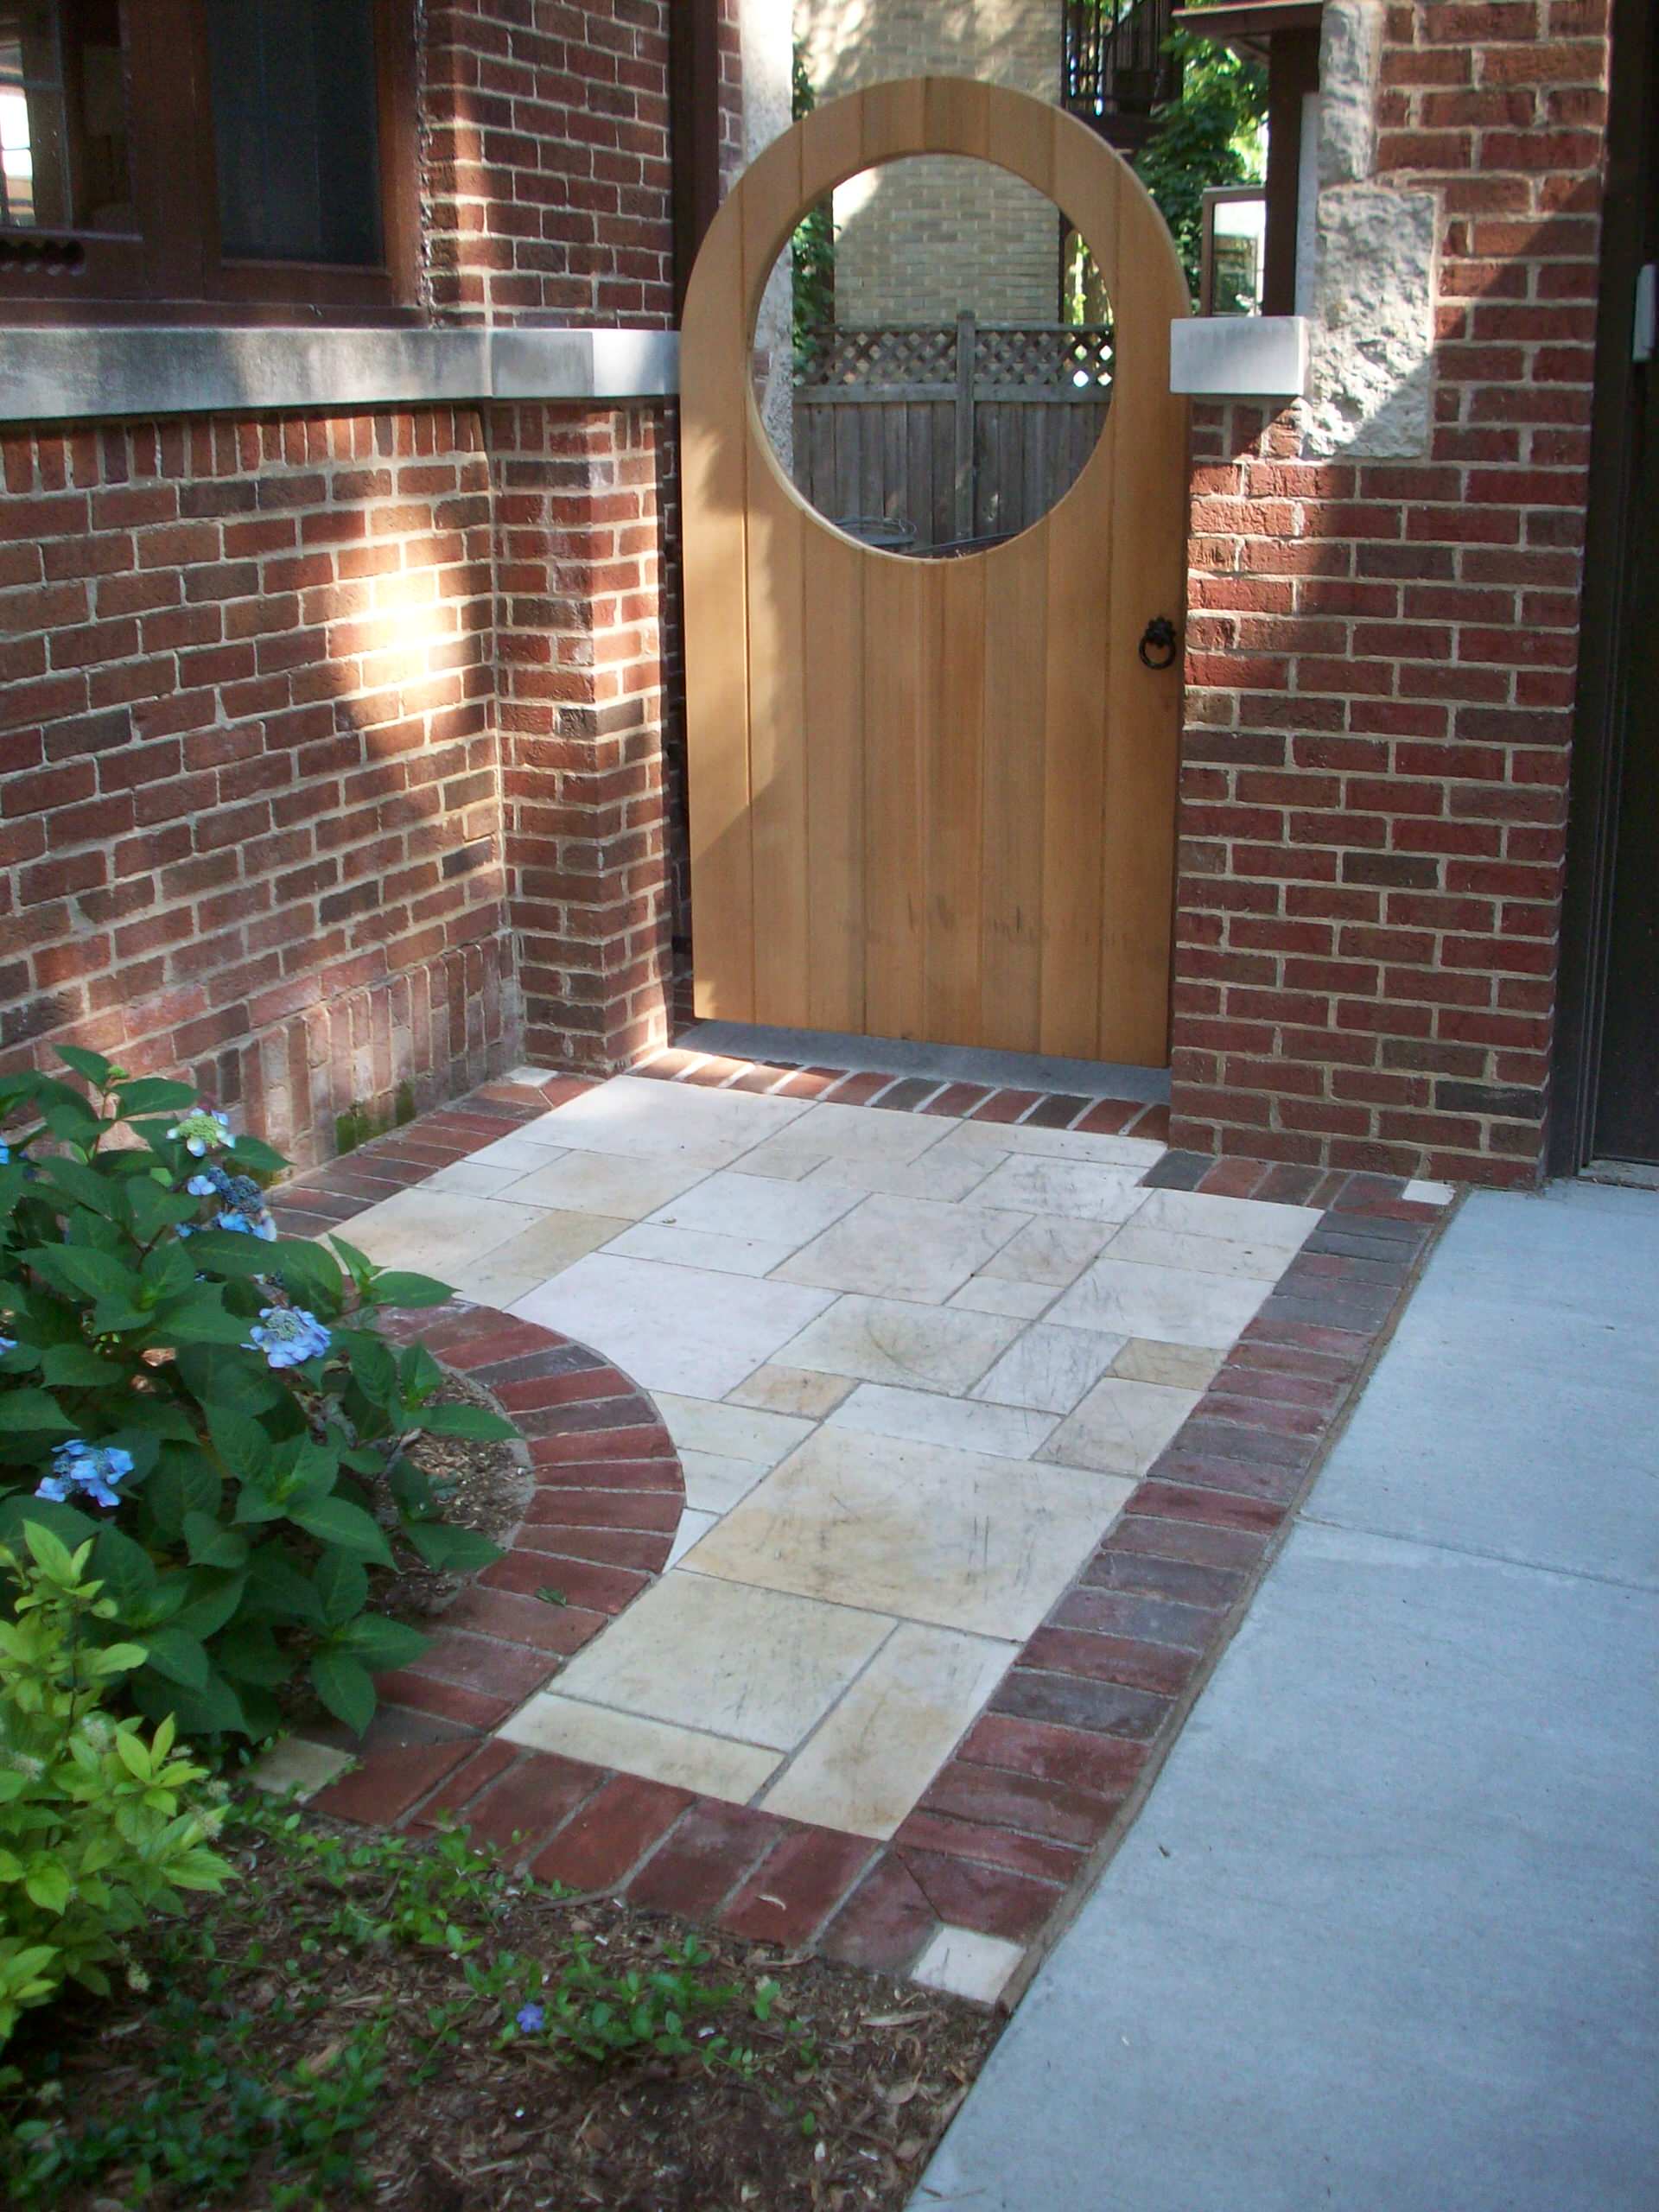 Traditional Landscape Makeover - Whitefish Bay